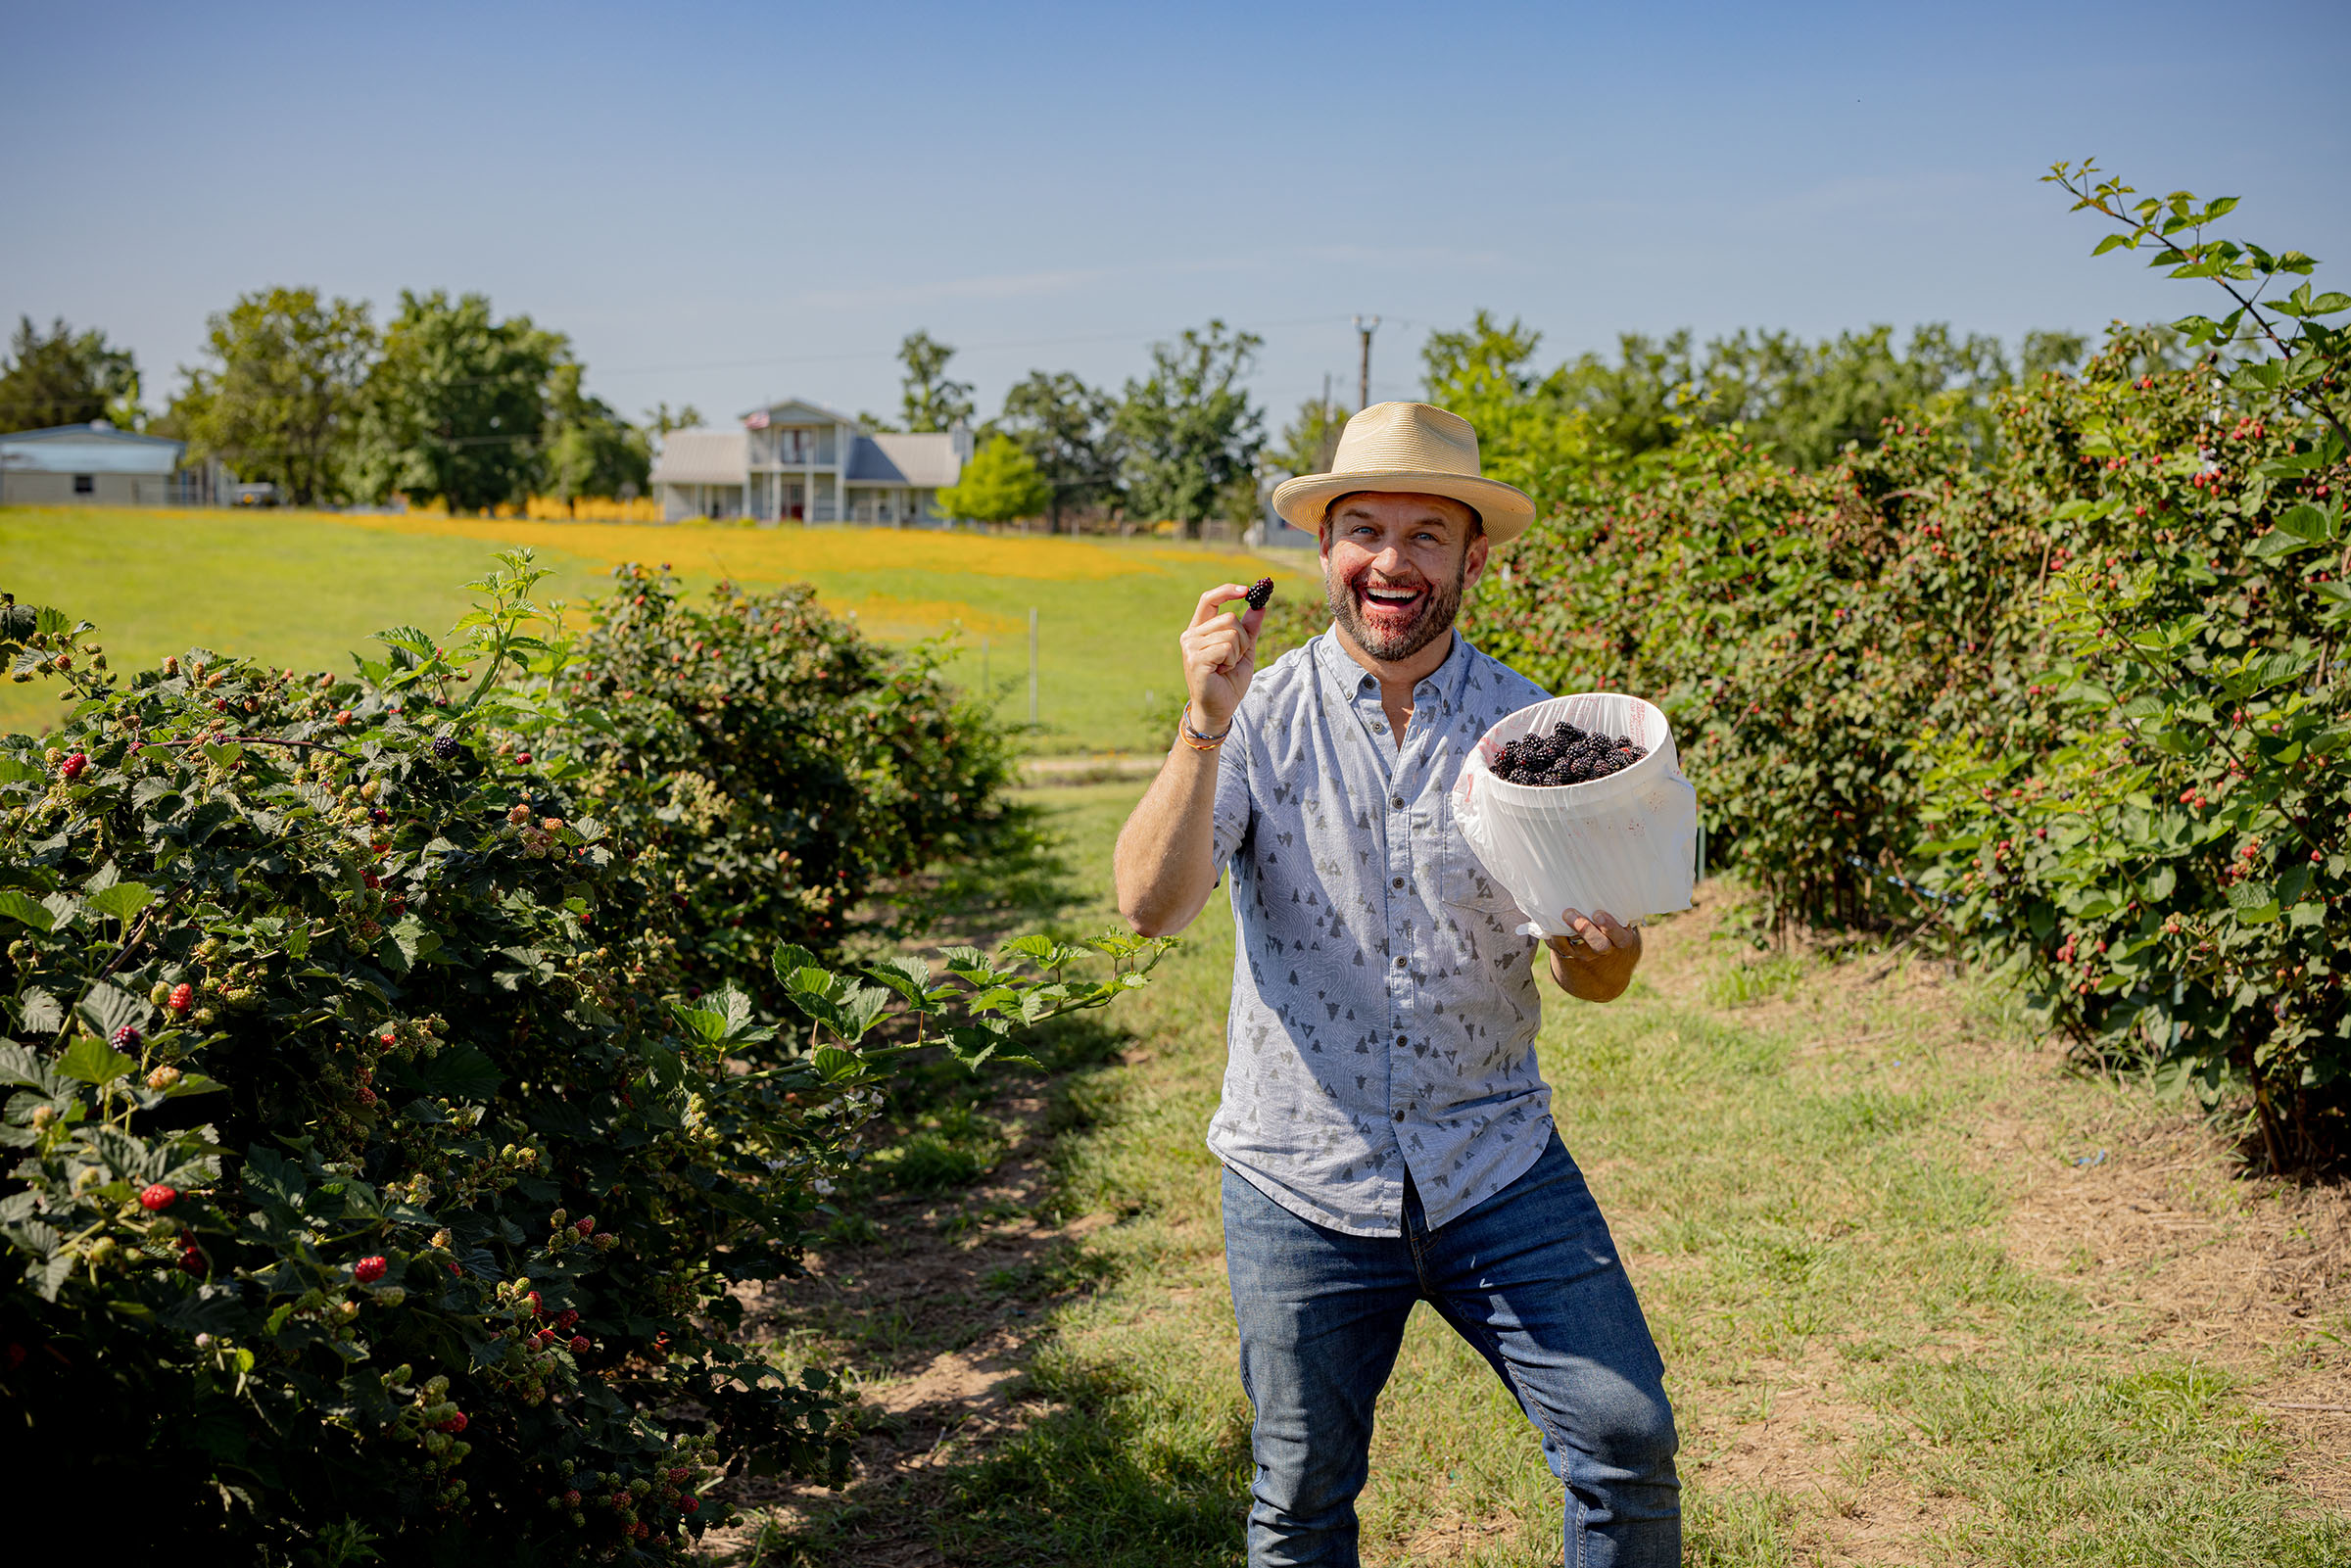 A man in a small cowboy hat stands with a large plastic bucket of blackberries in a green berry patch